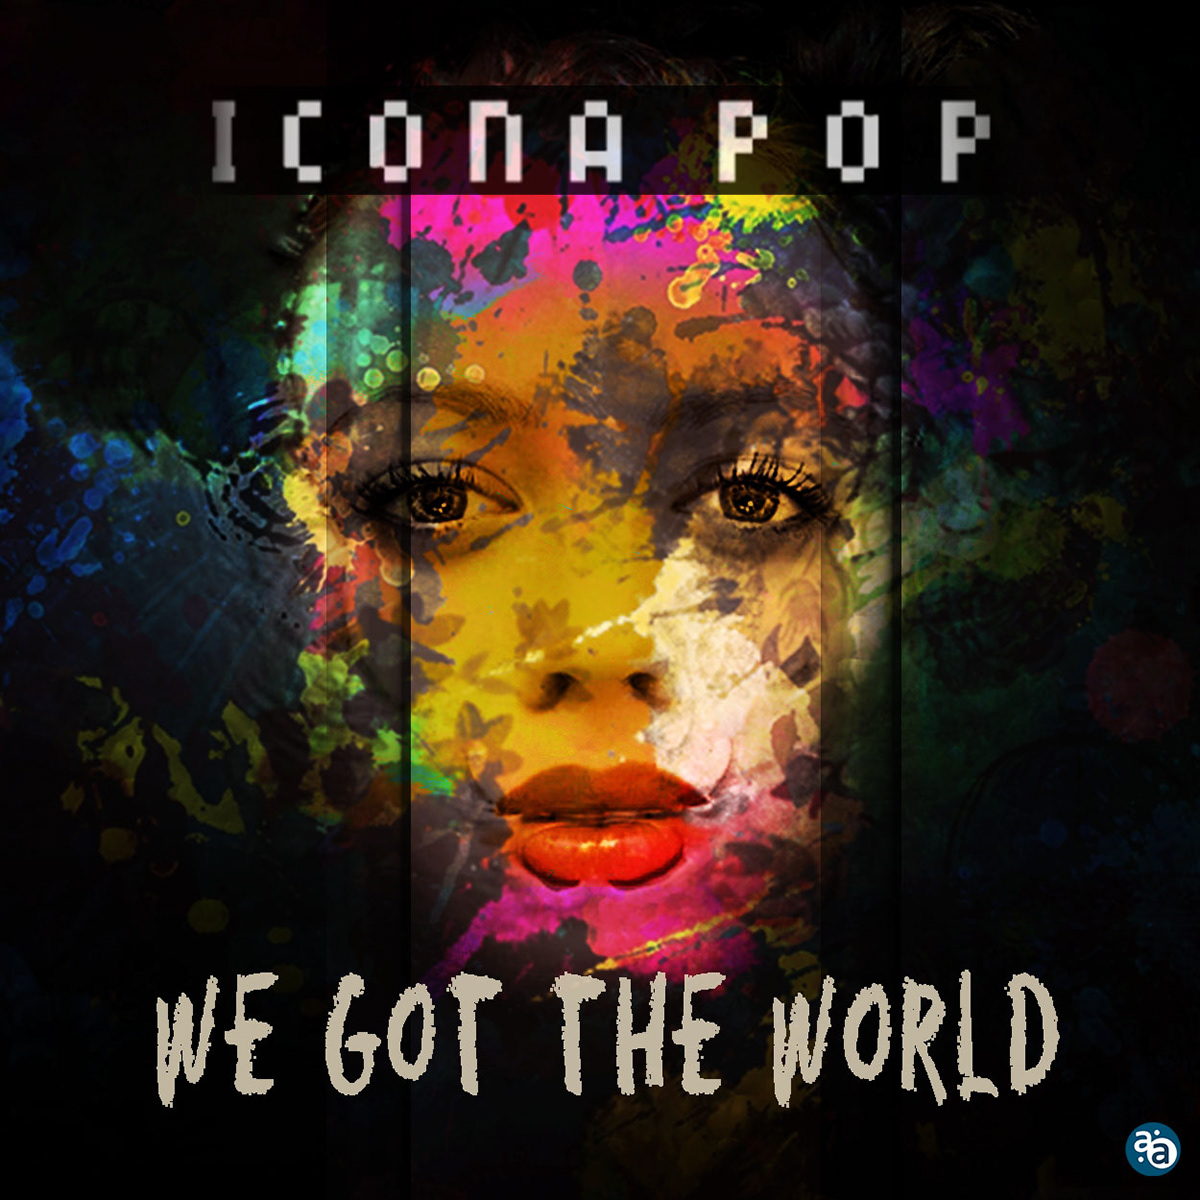 icona pop Layout graphics color effects CD label CD cover Adobe Photoshop